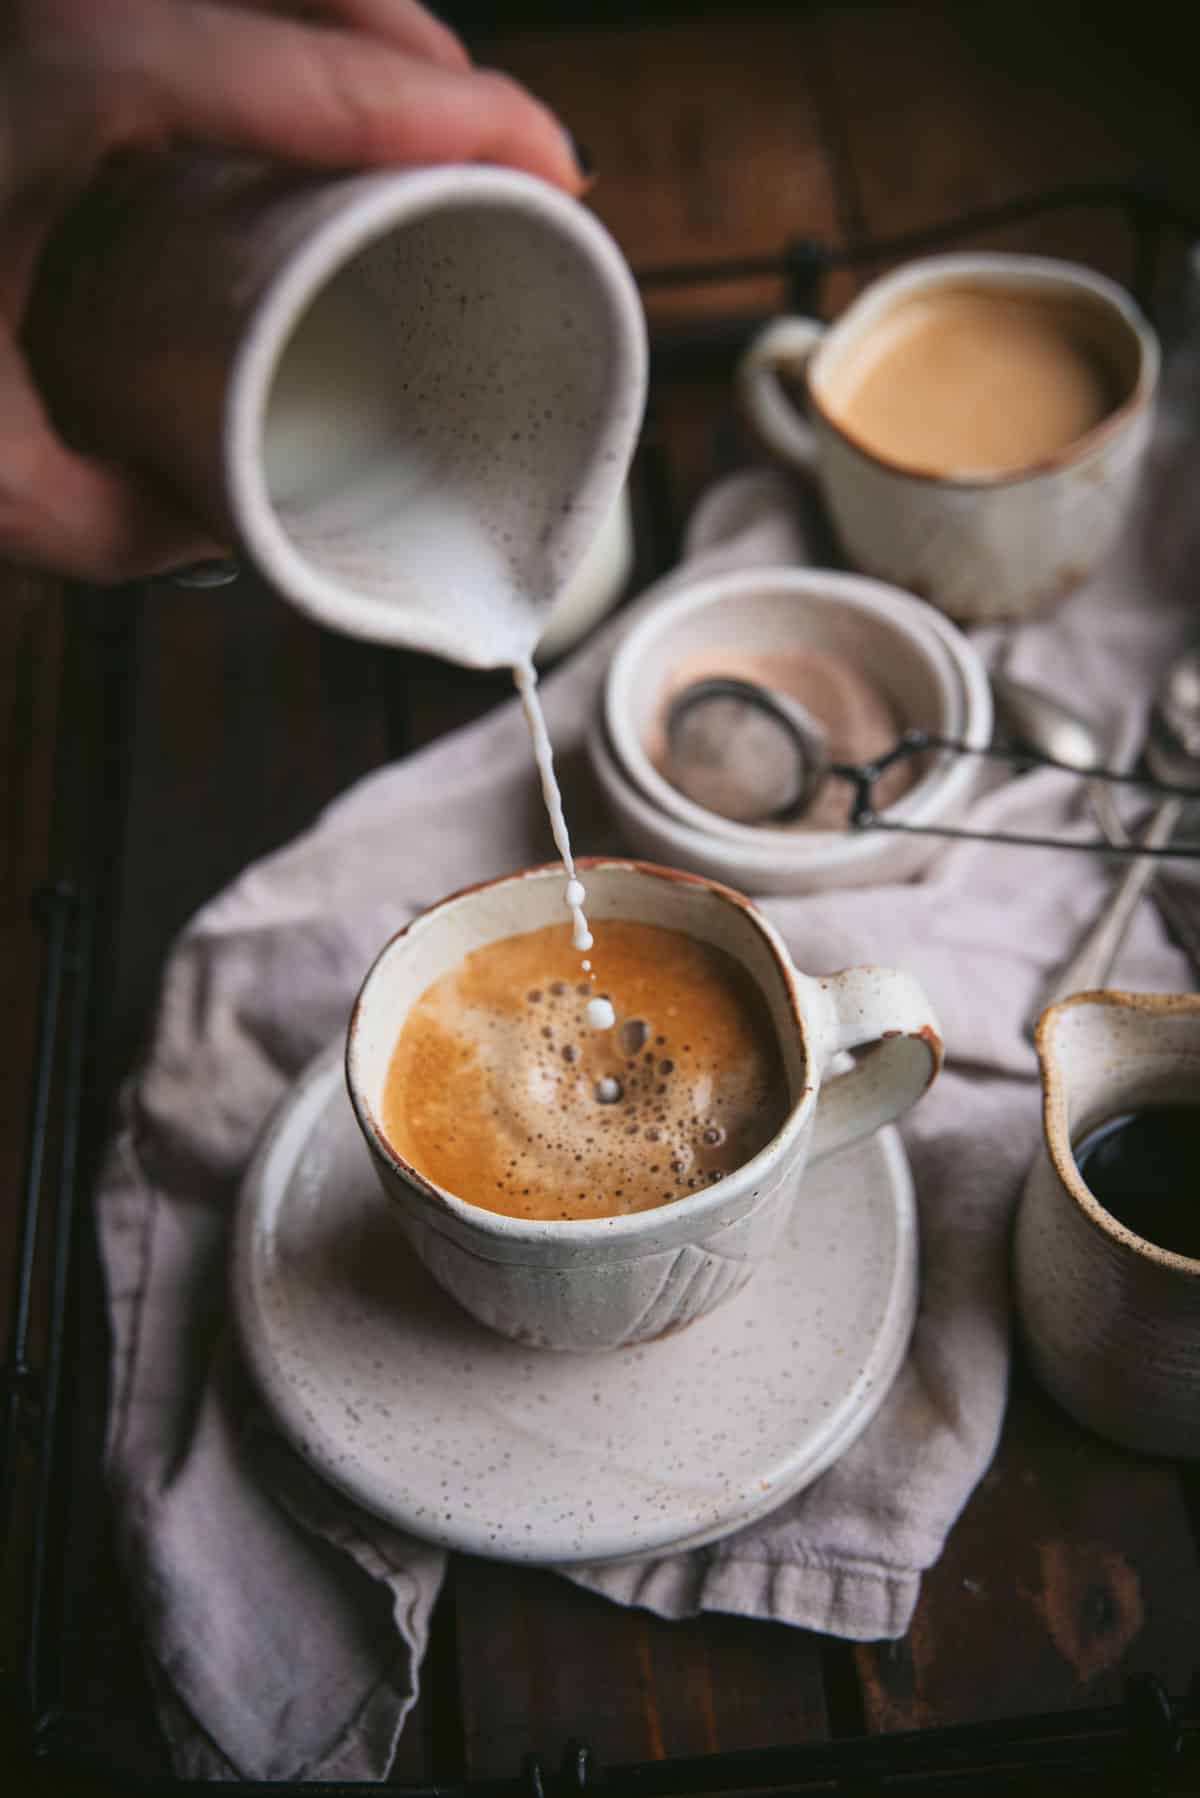 Hand held ceramic carafe pouring steamed milk into a coffee mug with espresso and maple syrup.  The milk is being slowly poured and single drops are hitting the surface of the coffee.